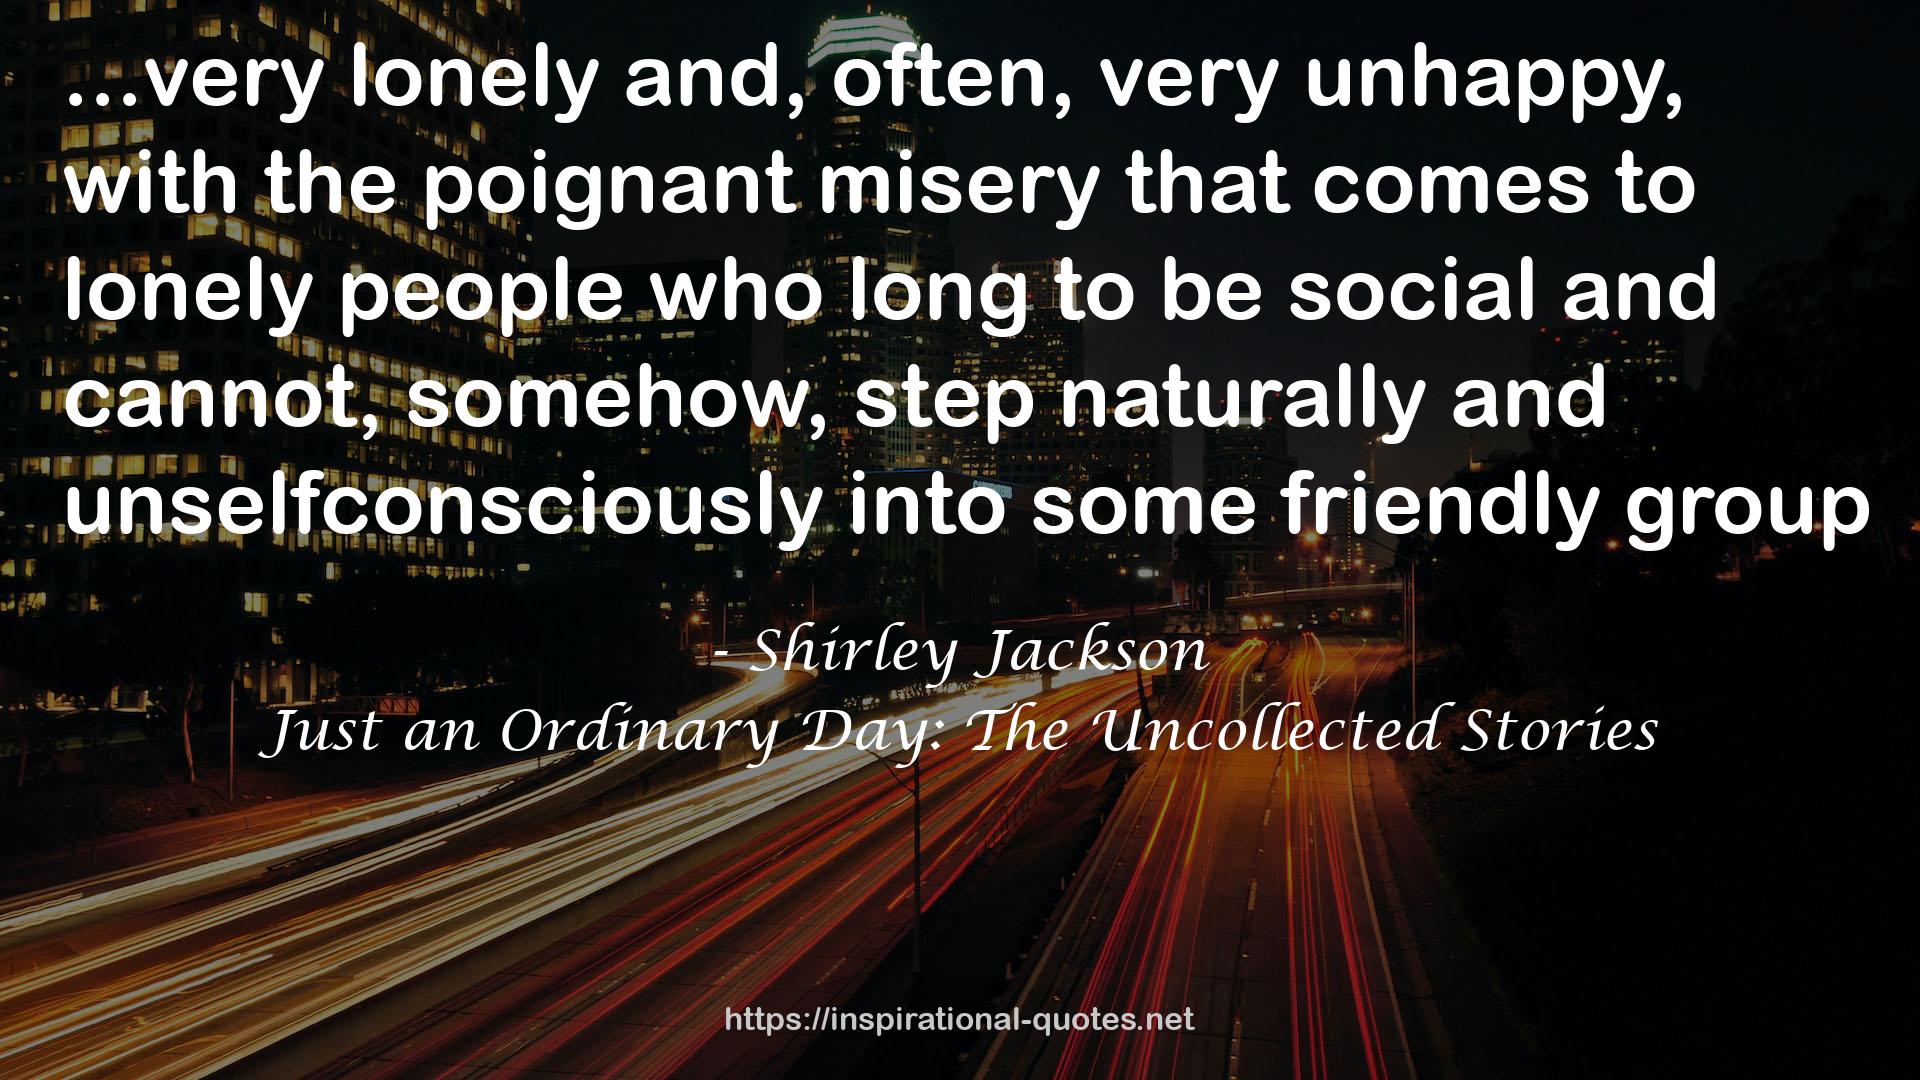 Just an Ordinary Day: The Uncollected Stories QUOTES